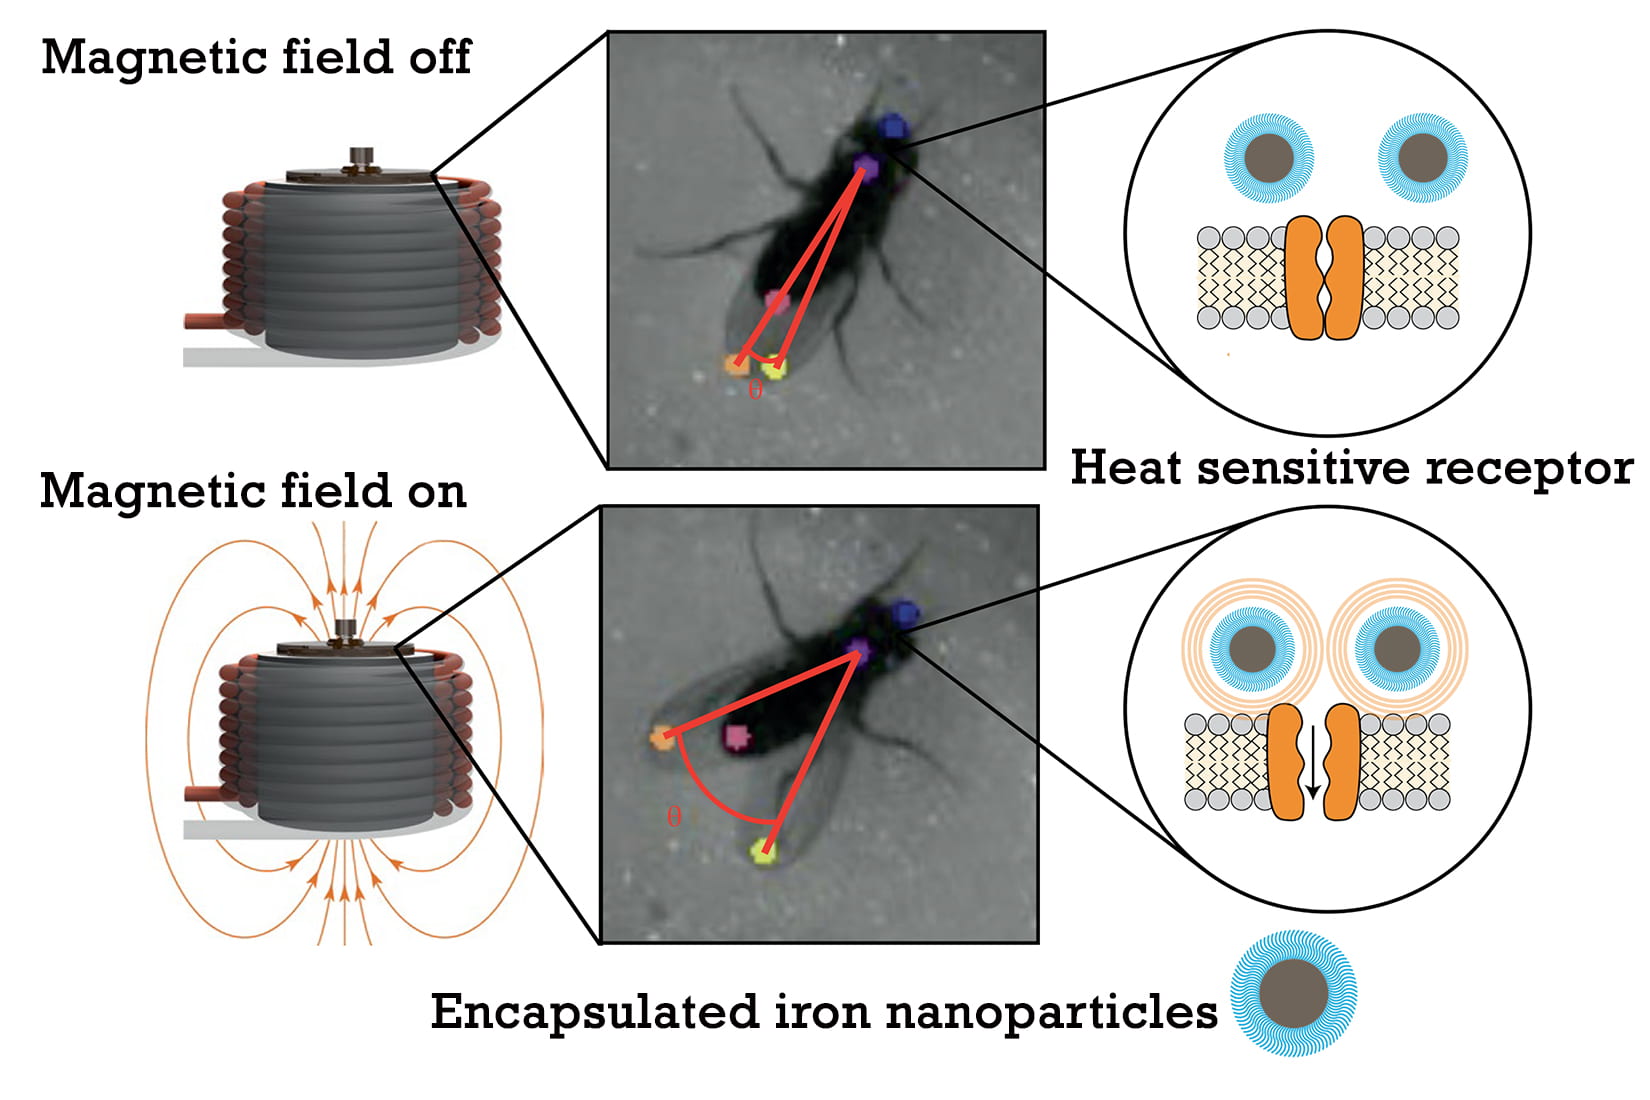 Researchers from Rice University, Duke University, Brown University and Baylor College of Medicine developed a magnetic technology to wirelessly control neural circuits in fruit flies. They used genetic engineering to express heat-sensitive ion channels in neurons that control the behavior and iron nanoparticles to activate the channels. When researchers activated a magnetic field in the flies’ enclosure, the nanoparticles converted magnetic energy to heat, firing the channels and activating the neurons. An overhead camera filmed flies during experiments, and a visual analysis showed flies with the genetic modifications assumed the wing-spread posture within approximately half a second of receiving the magnetic signal. (Figure courtesy of C. Sebesta and J. Robinson/Rice University)